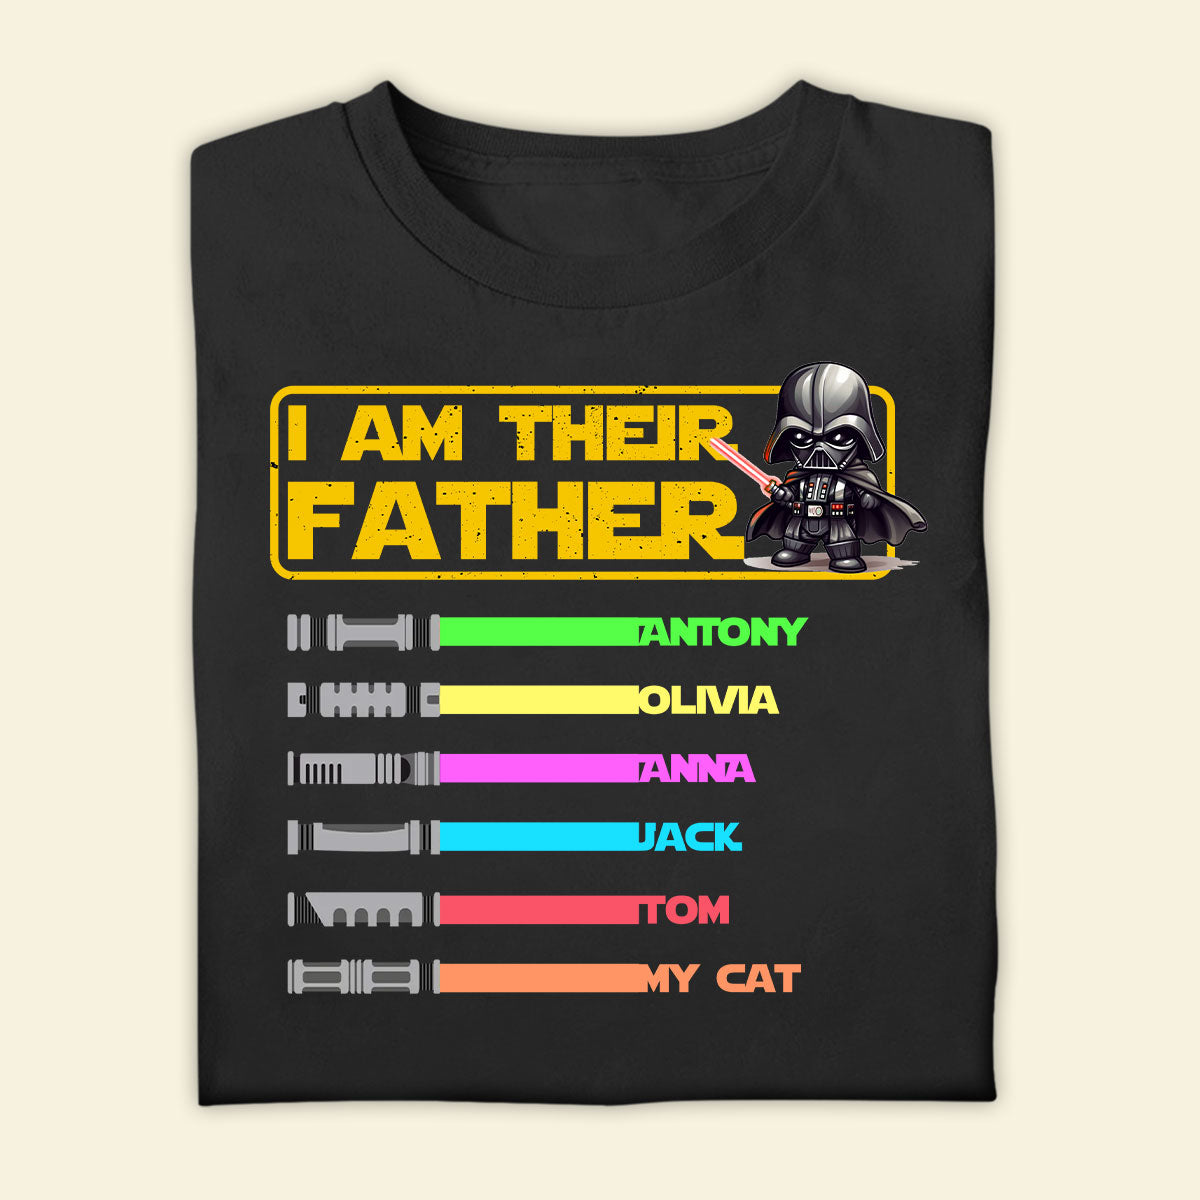 Personalized Lightsaber T-Shirt For Dad - I Am Their Father - Dad Customized Sweatshirt